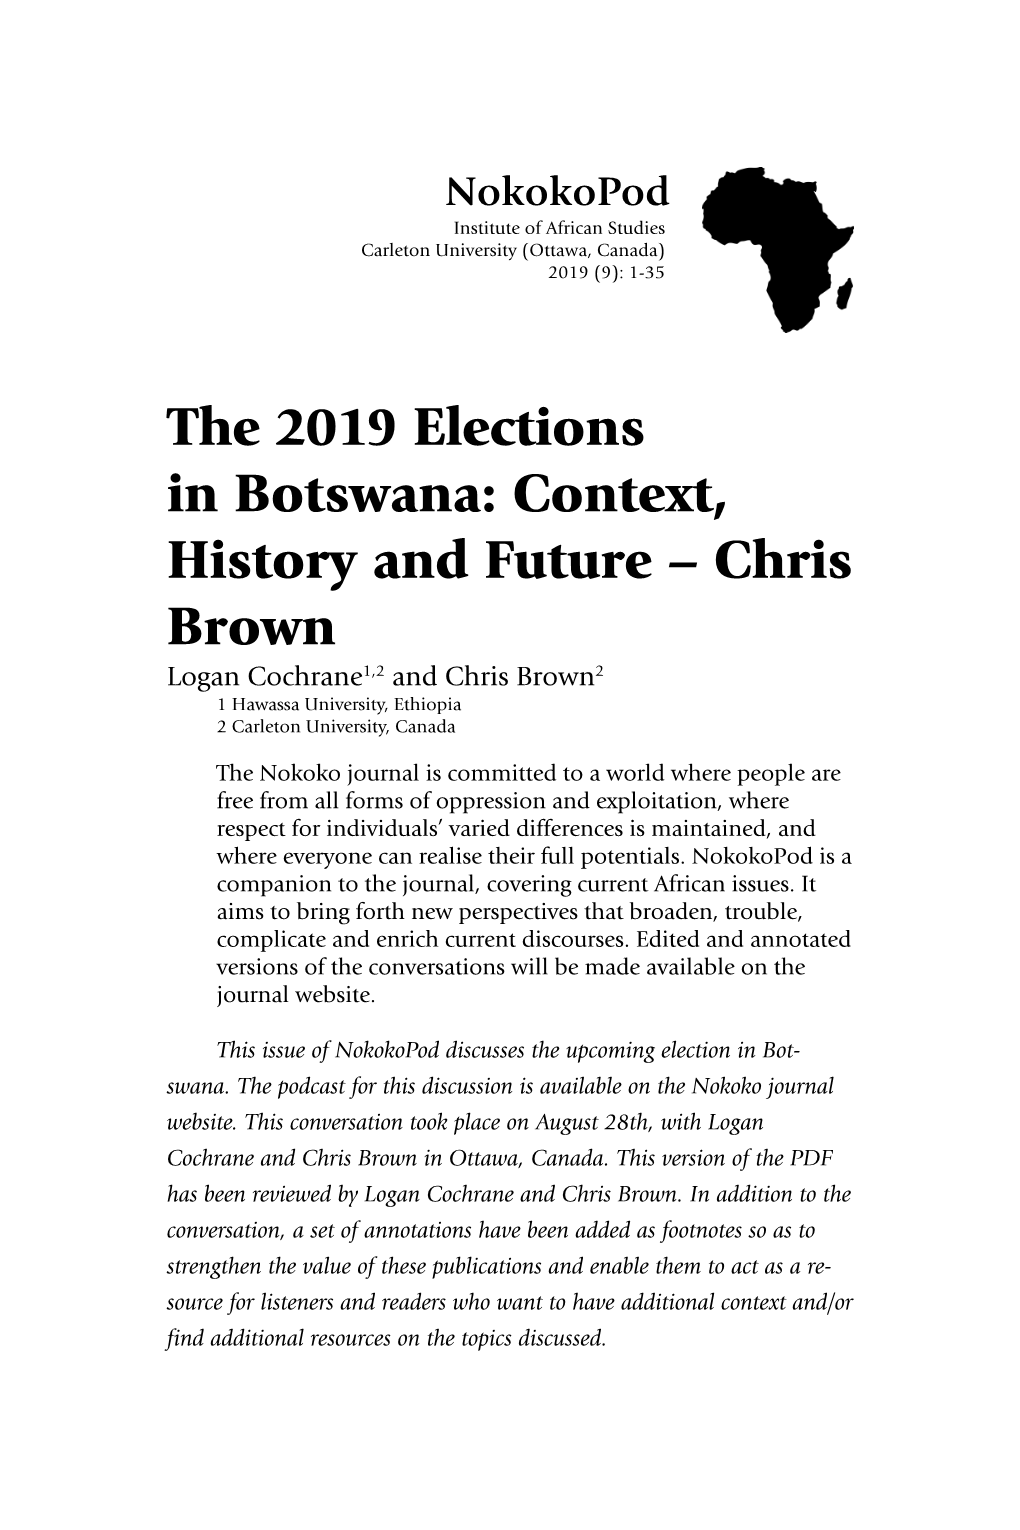 The 2019 Elections in Botswana: Context, History and Future – Chris